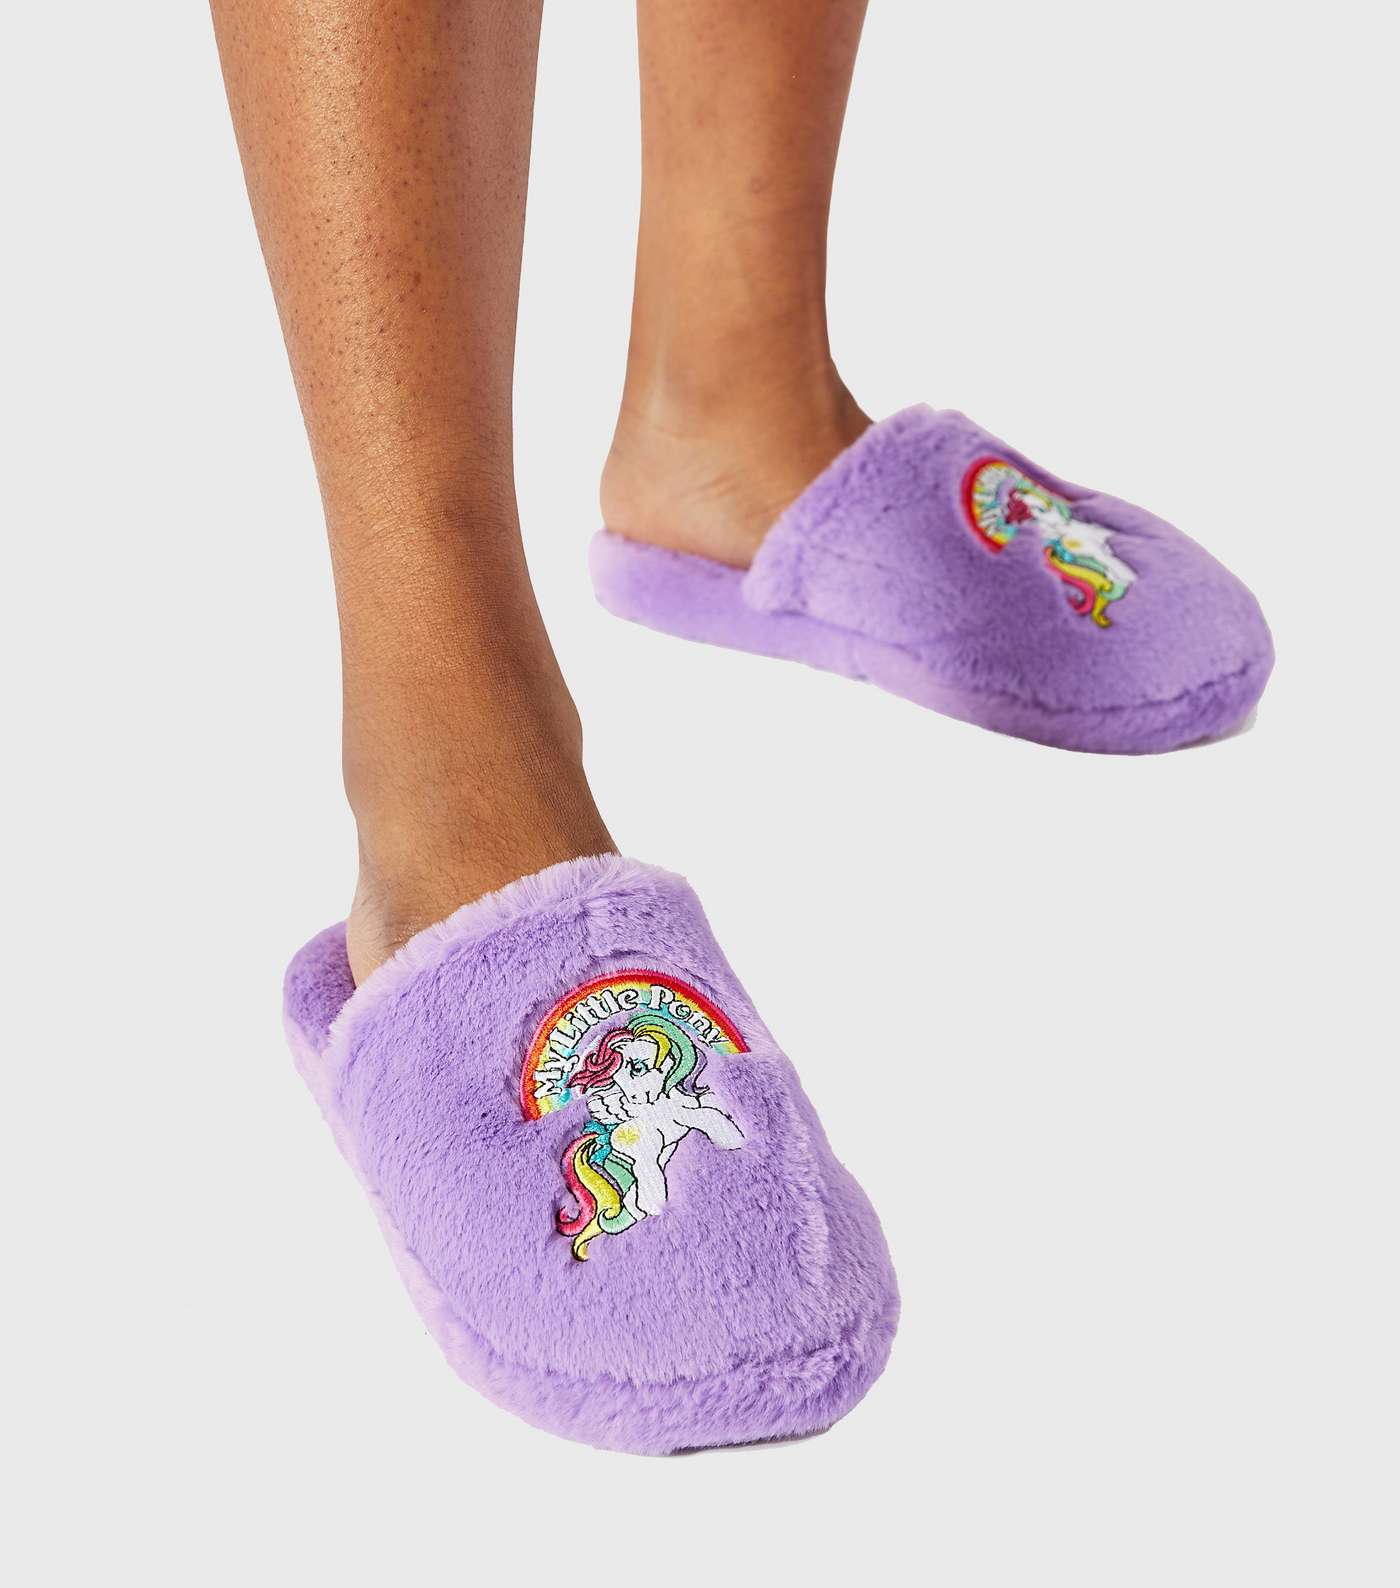 Skinnydip Lilac My Little Pony Embroidered Slippers Image 3